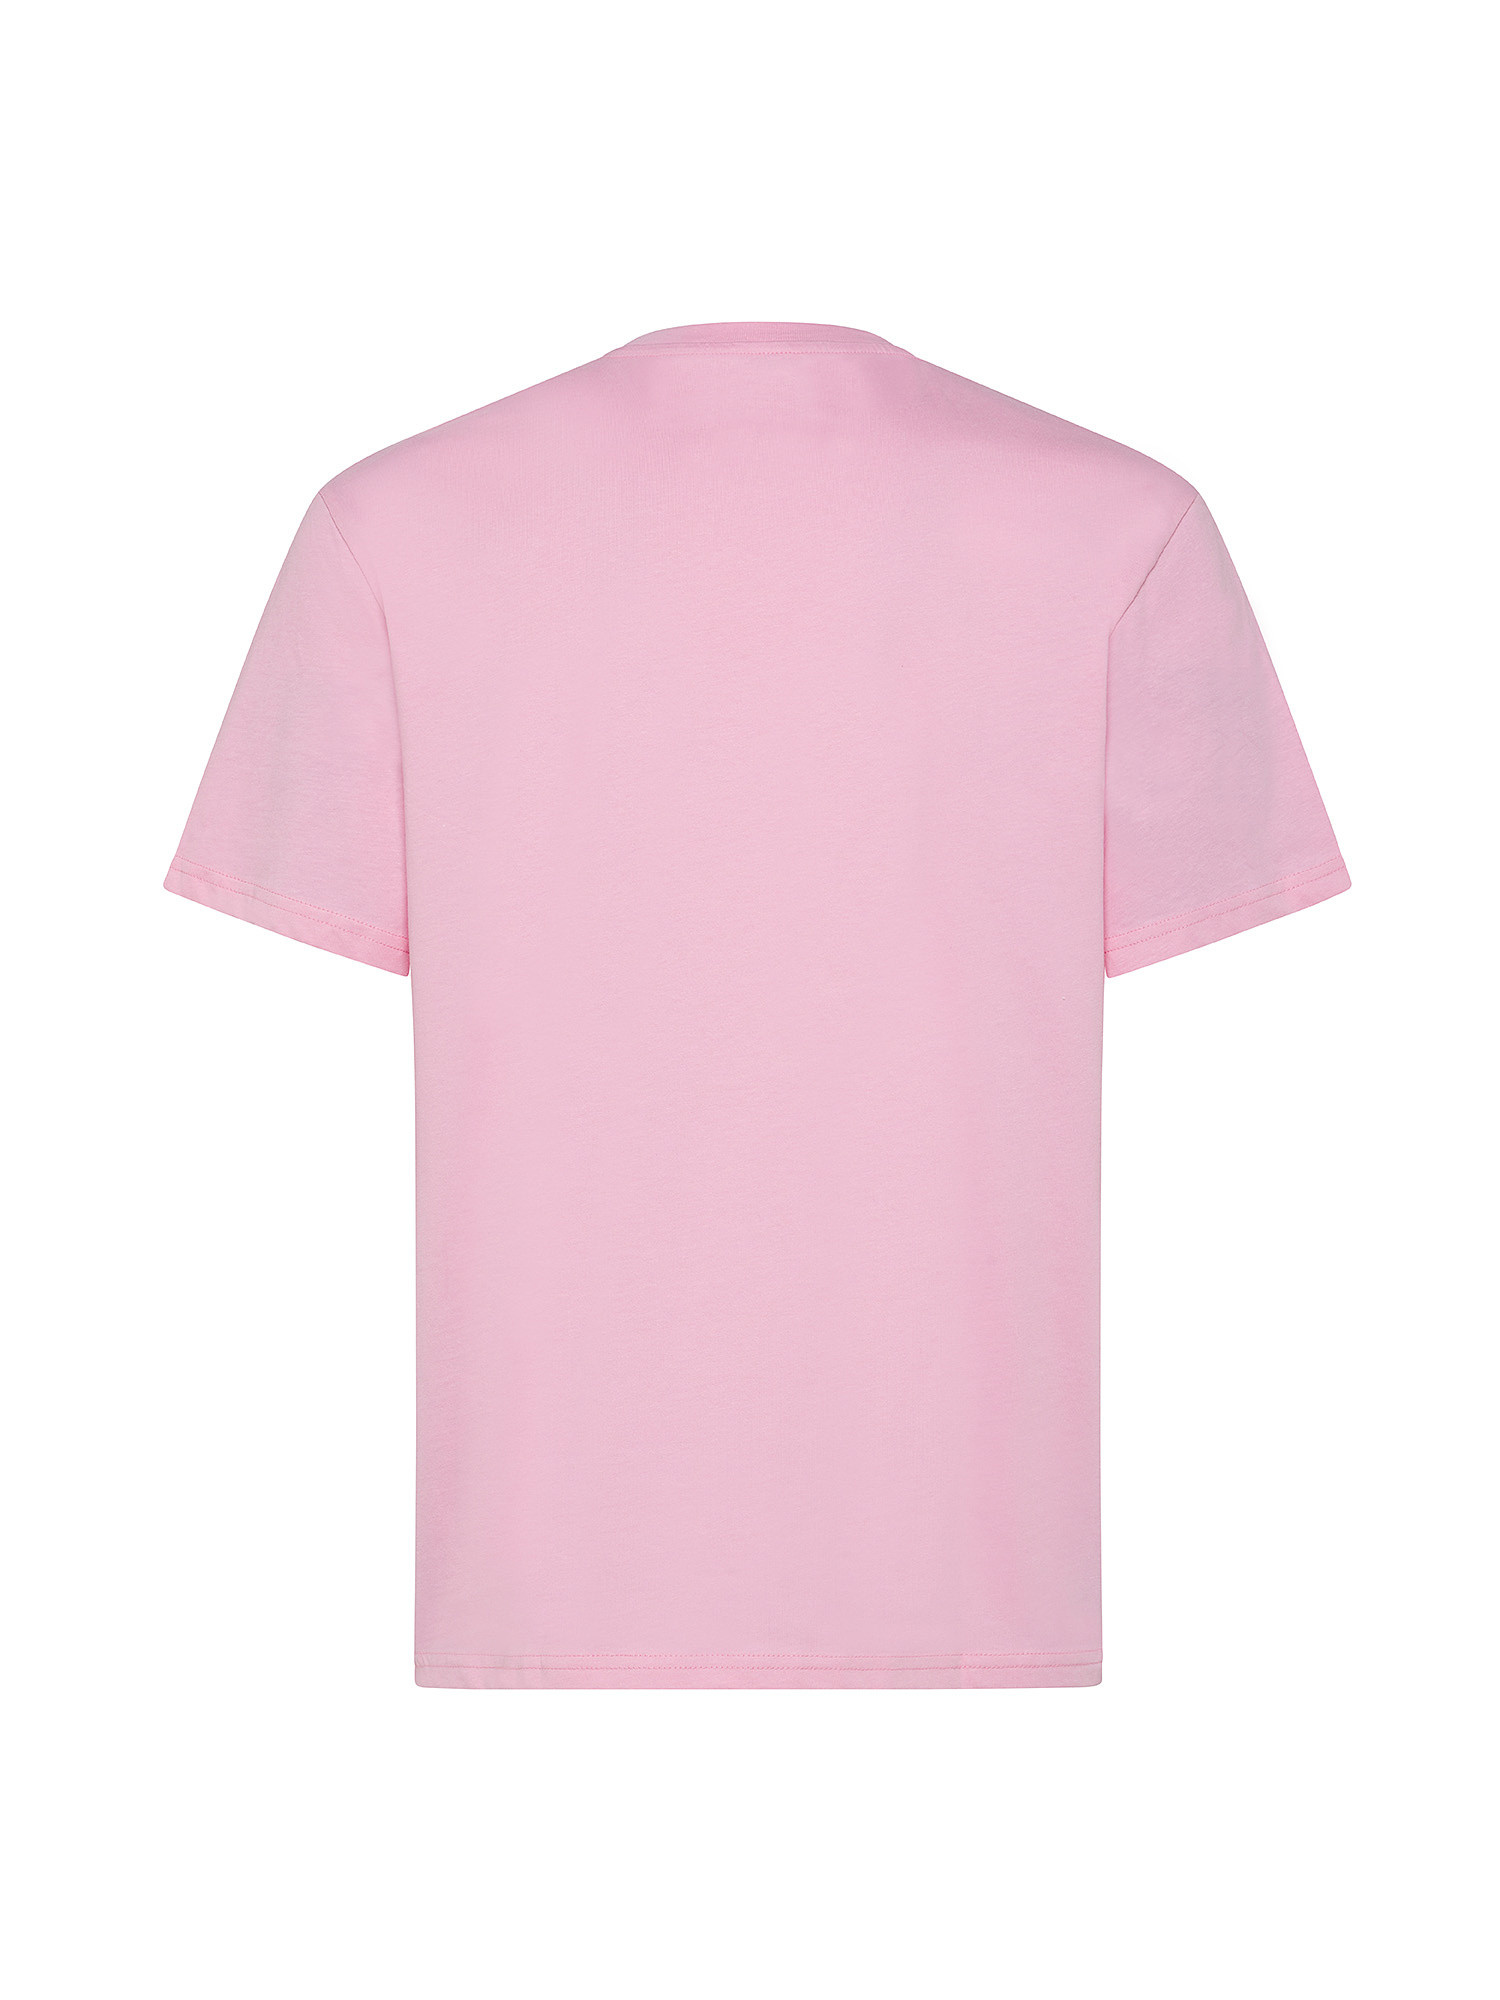 Jack & Jones - Relaxed fit T-shirt with print, Pink, large image number 1